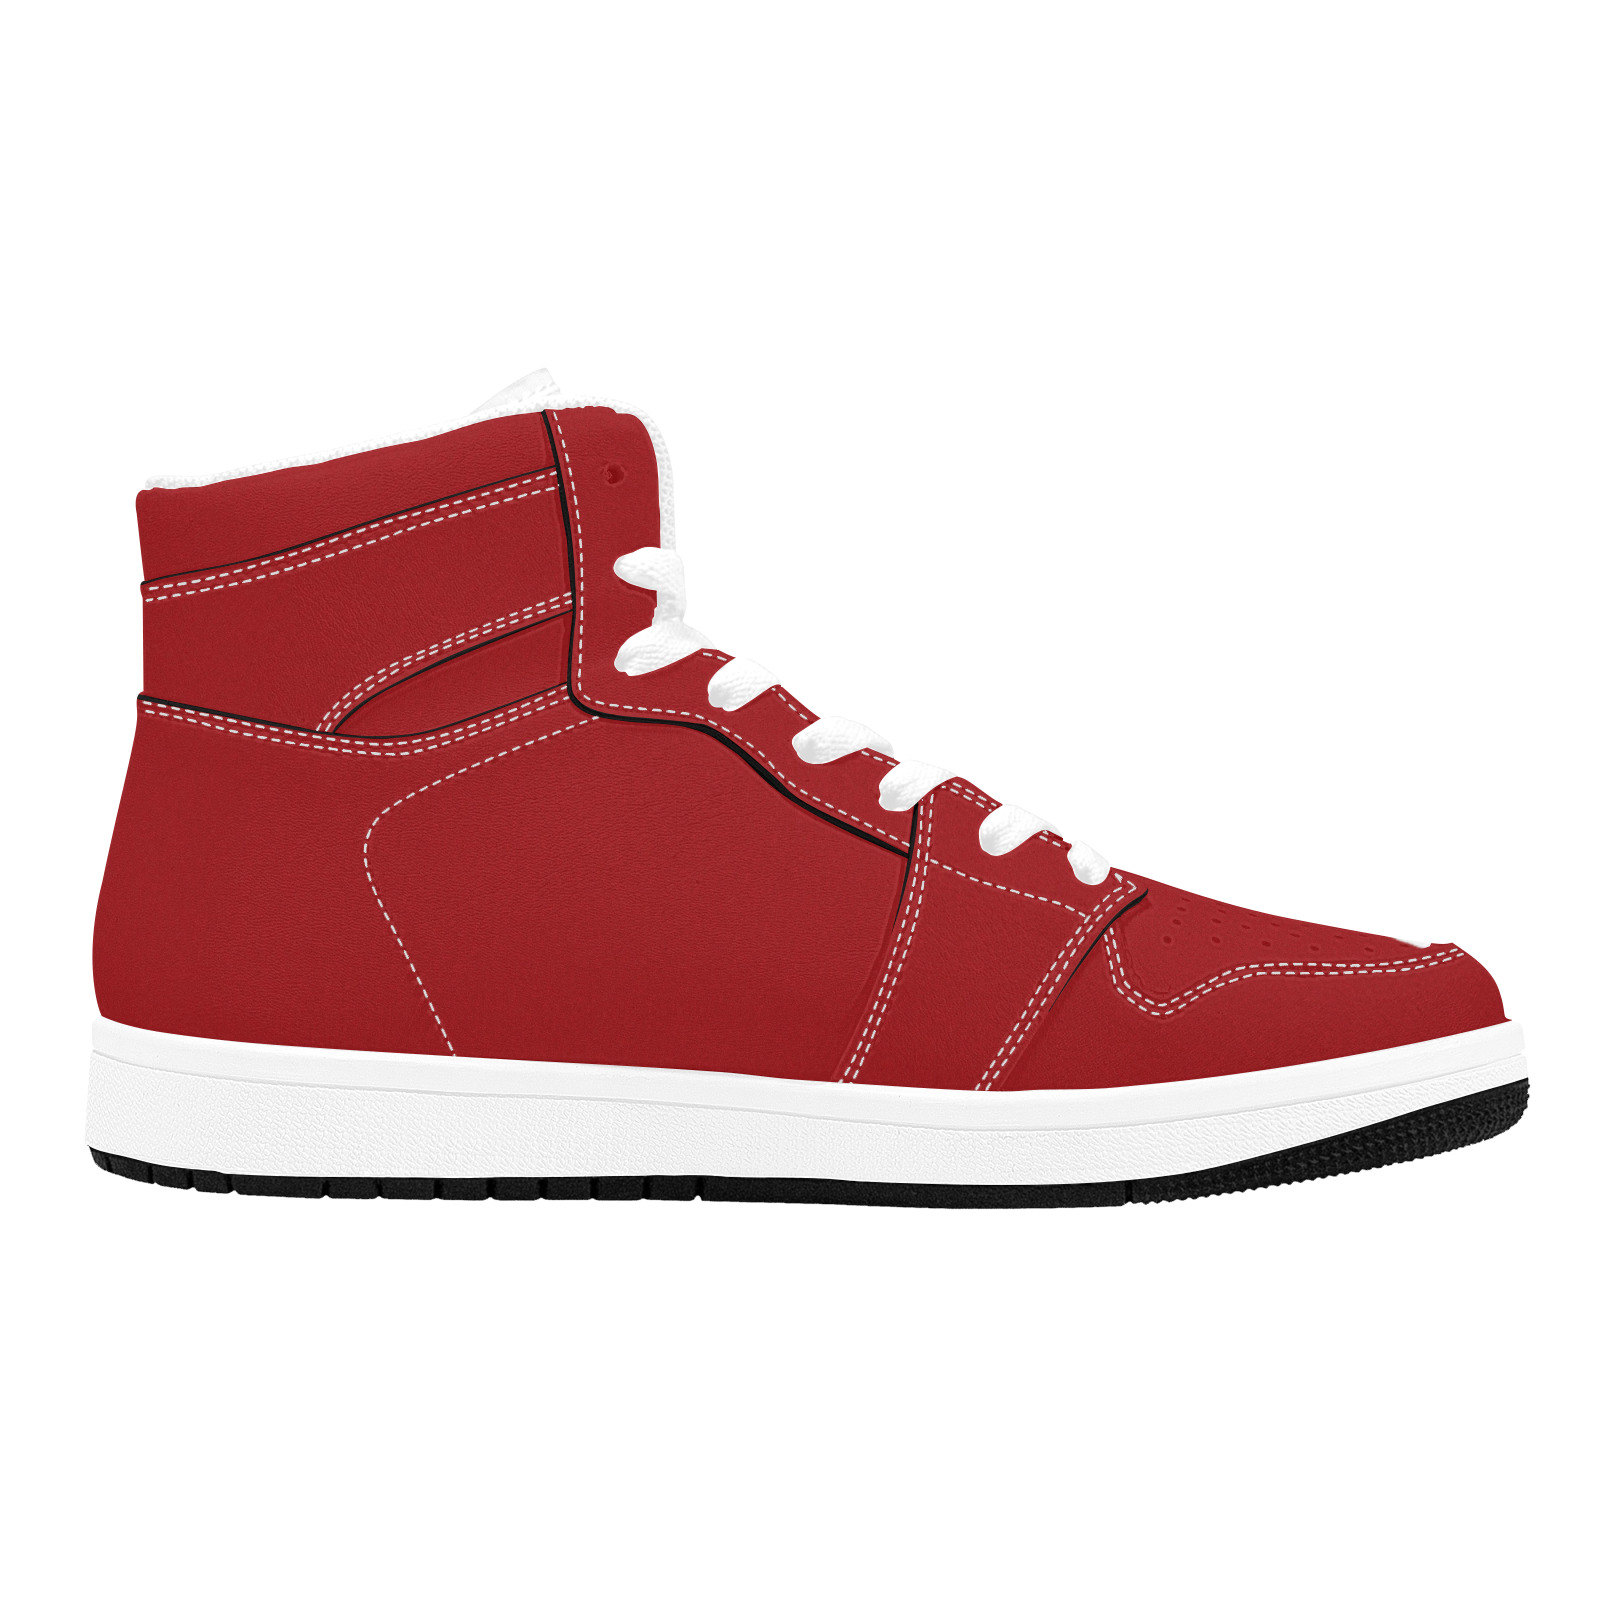 Cool Canda Sneakers Running Shoes Unisex High Top Sneakers (Model 20042)